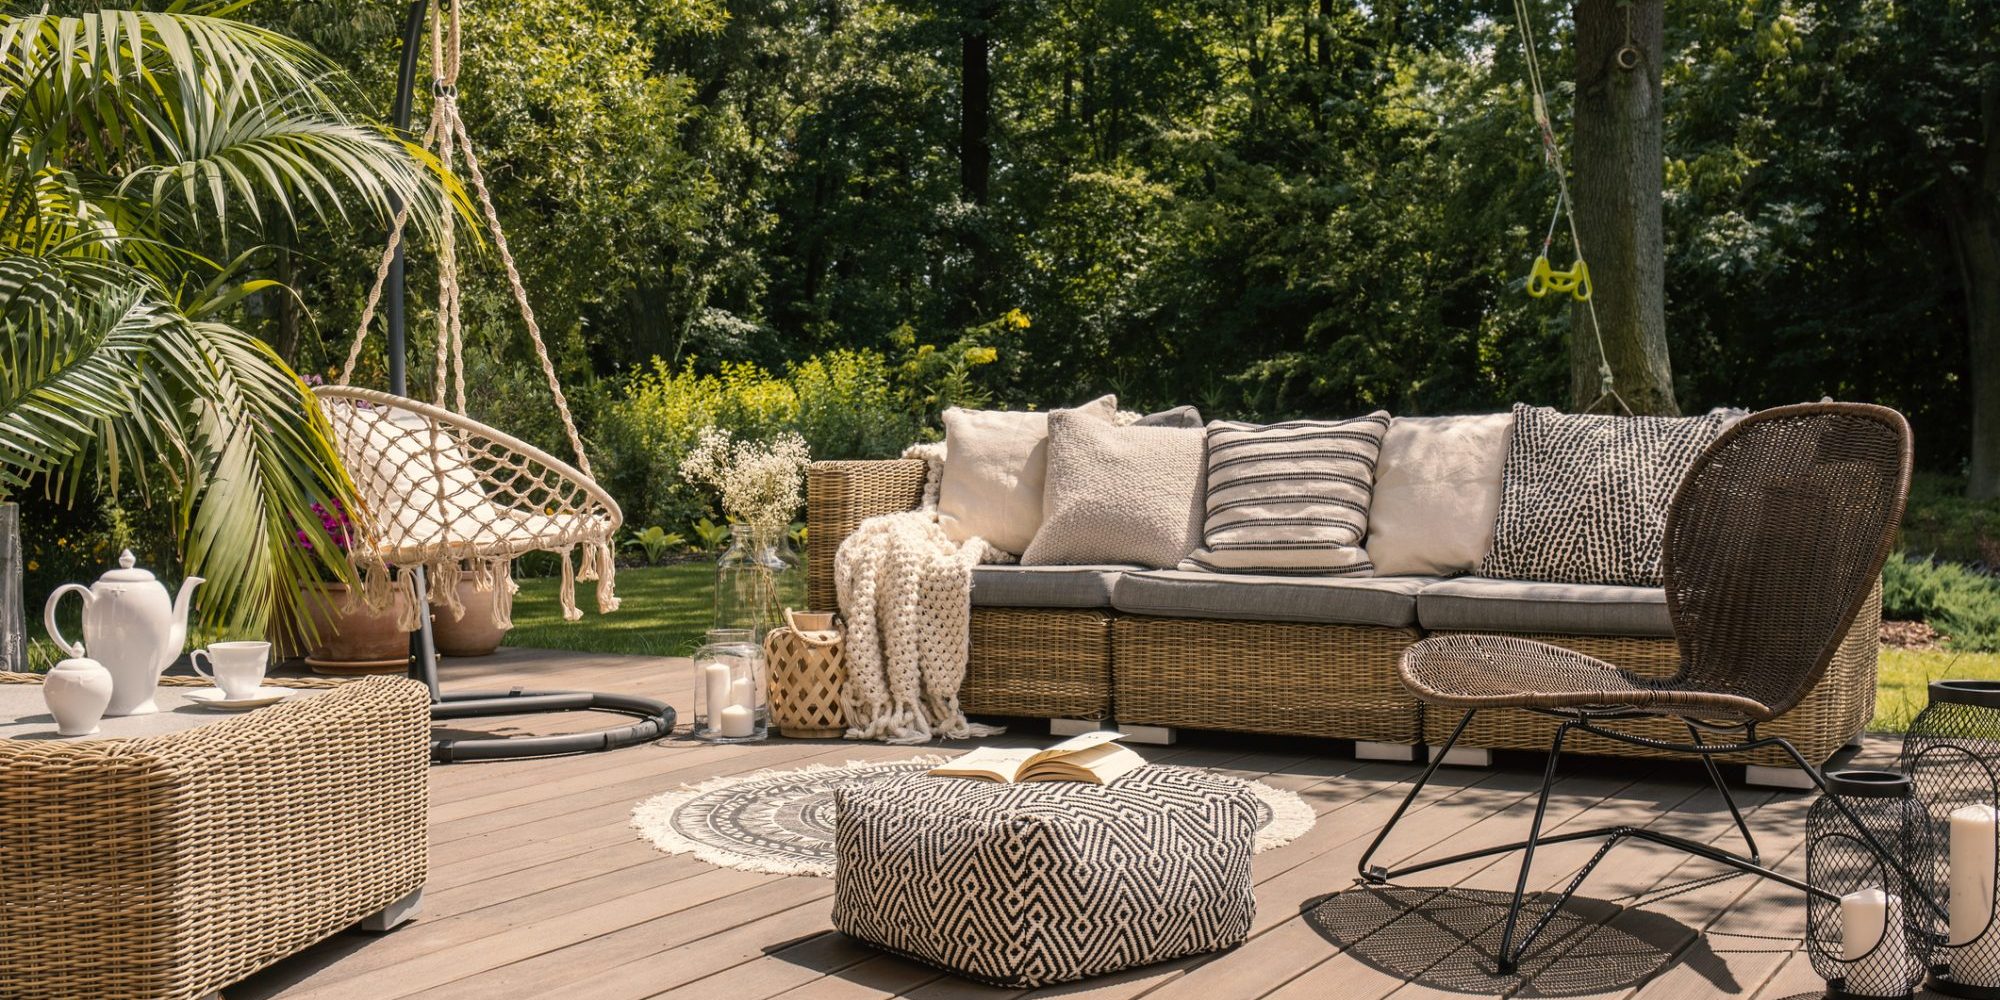 A rattan patio set including a sofa, a table and a chair on a wooden deck in the sunny garden. concept